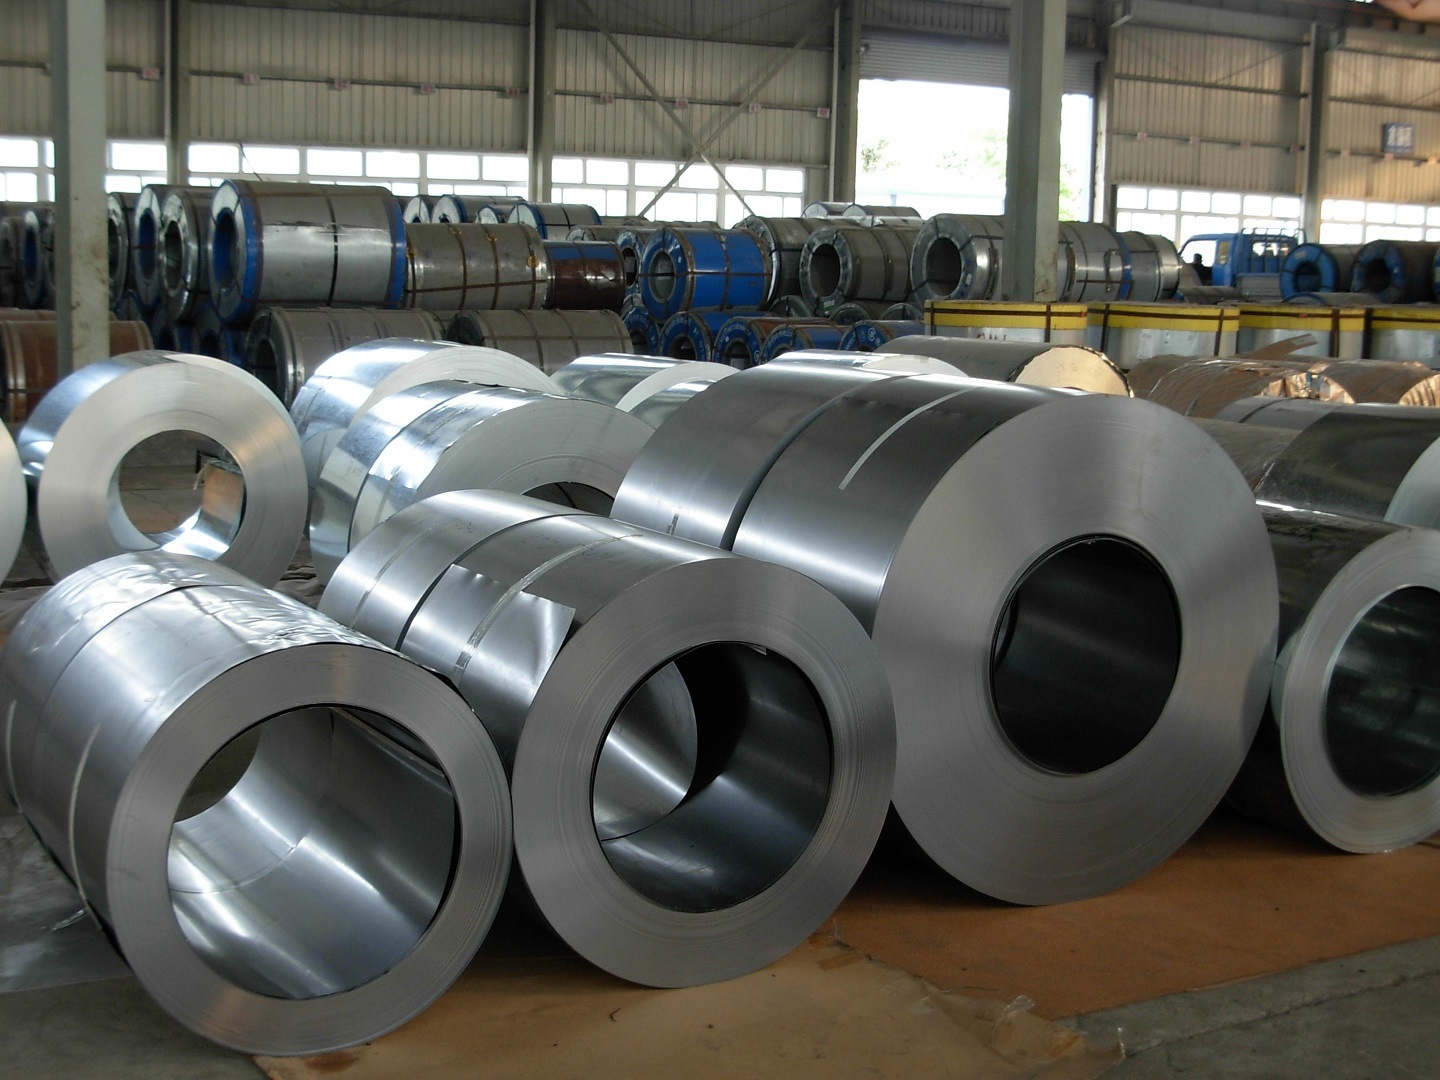 A sunch of stainless steel coil sheet